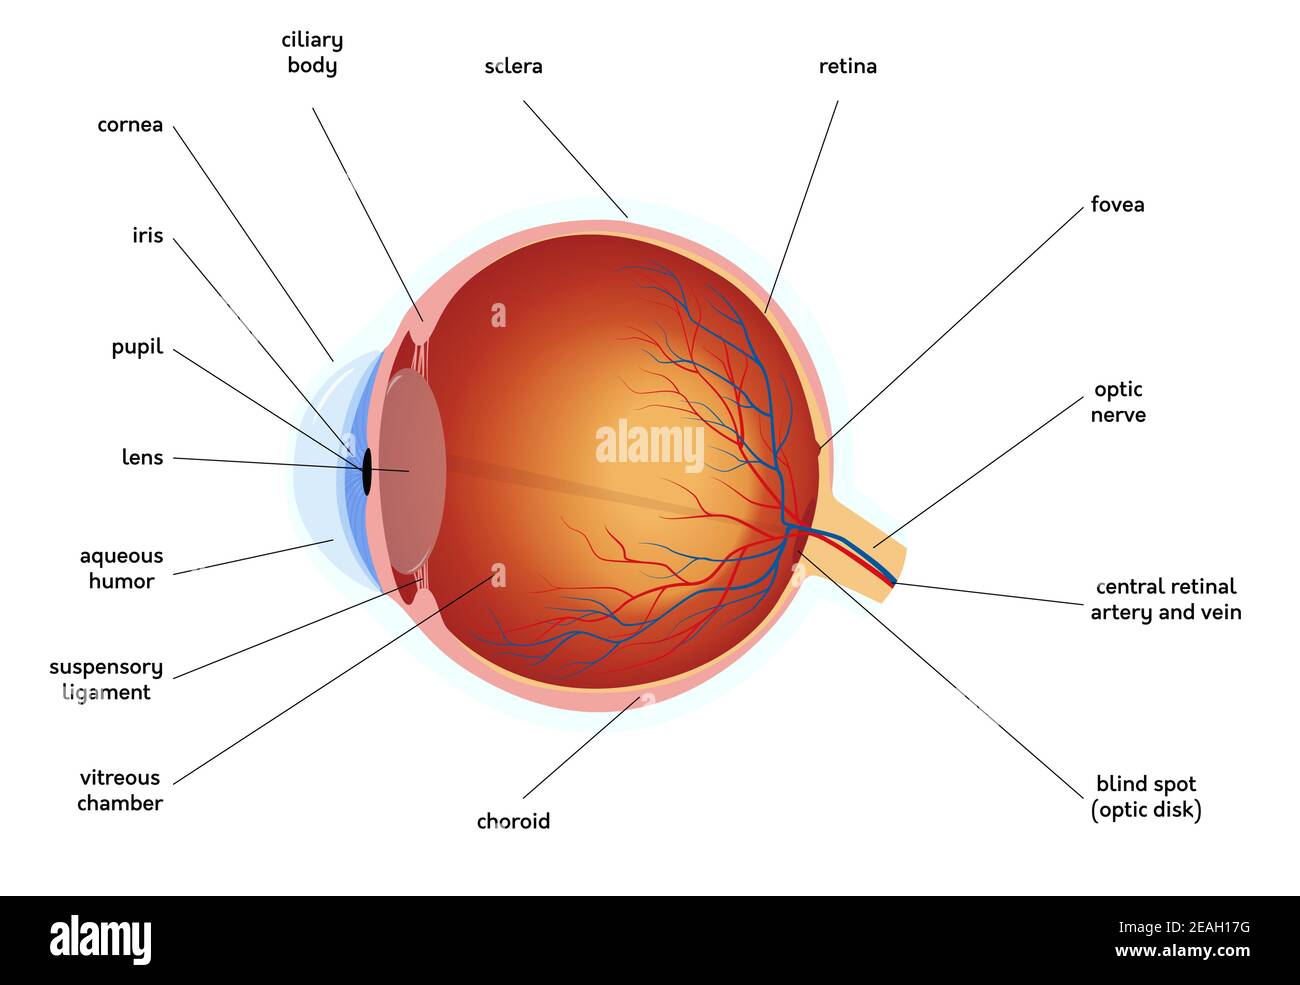 Human eye anatomy diagram, medical educational cross section illustration. Isolated on a white background. Stock Vector